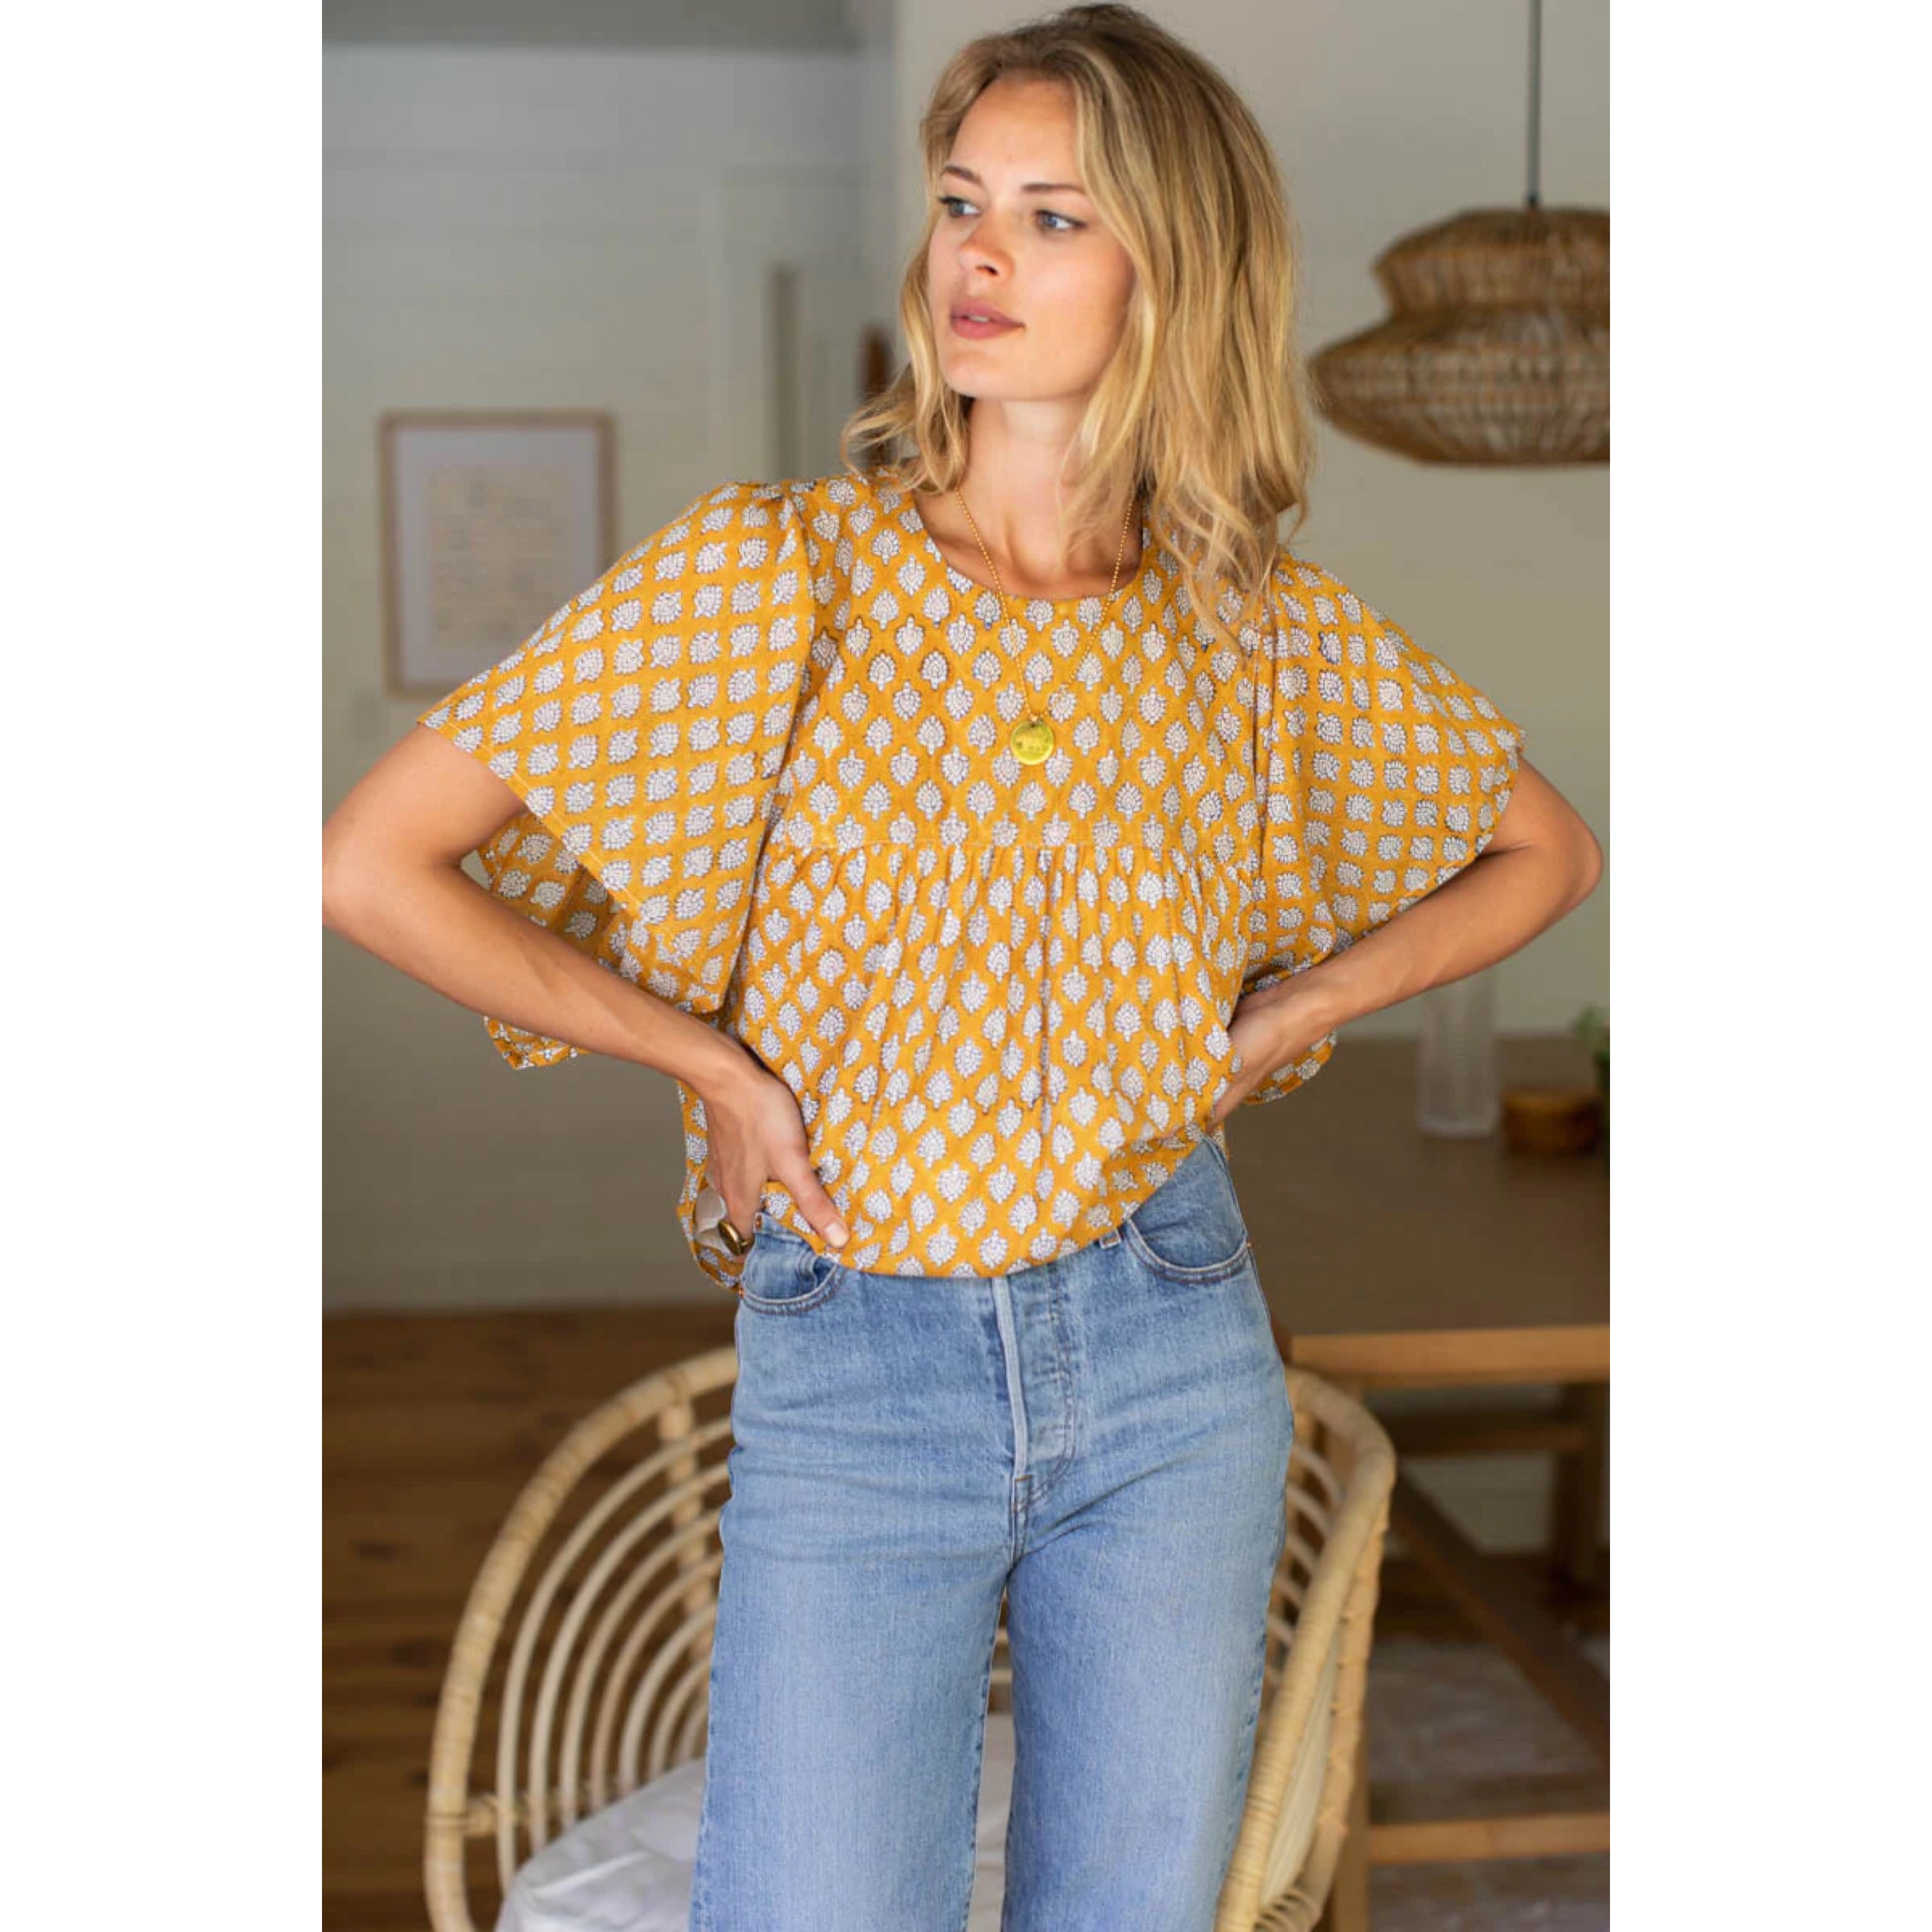 Emerson Fry India Collection yellow blouse, size S